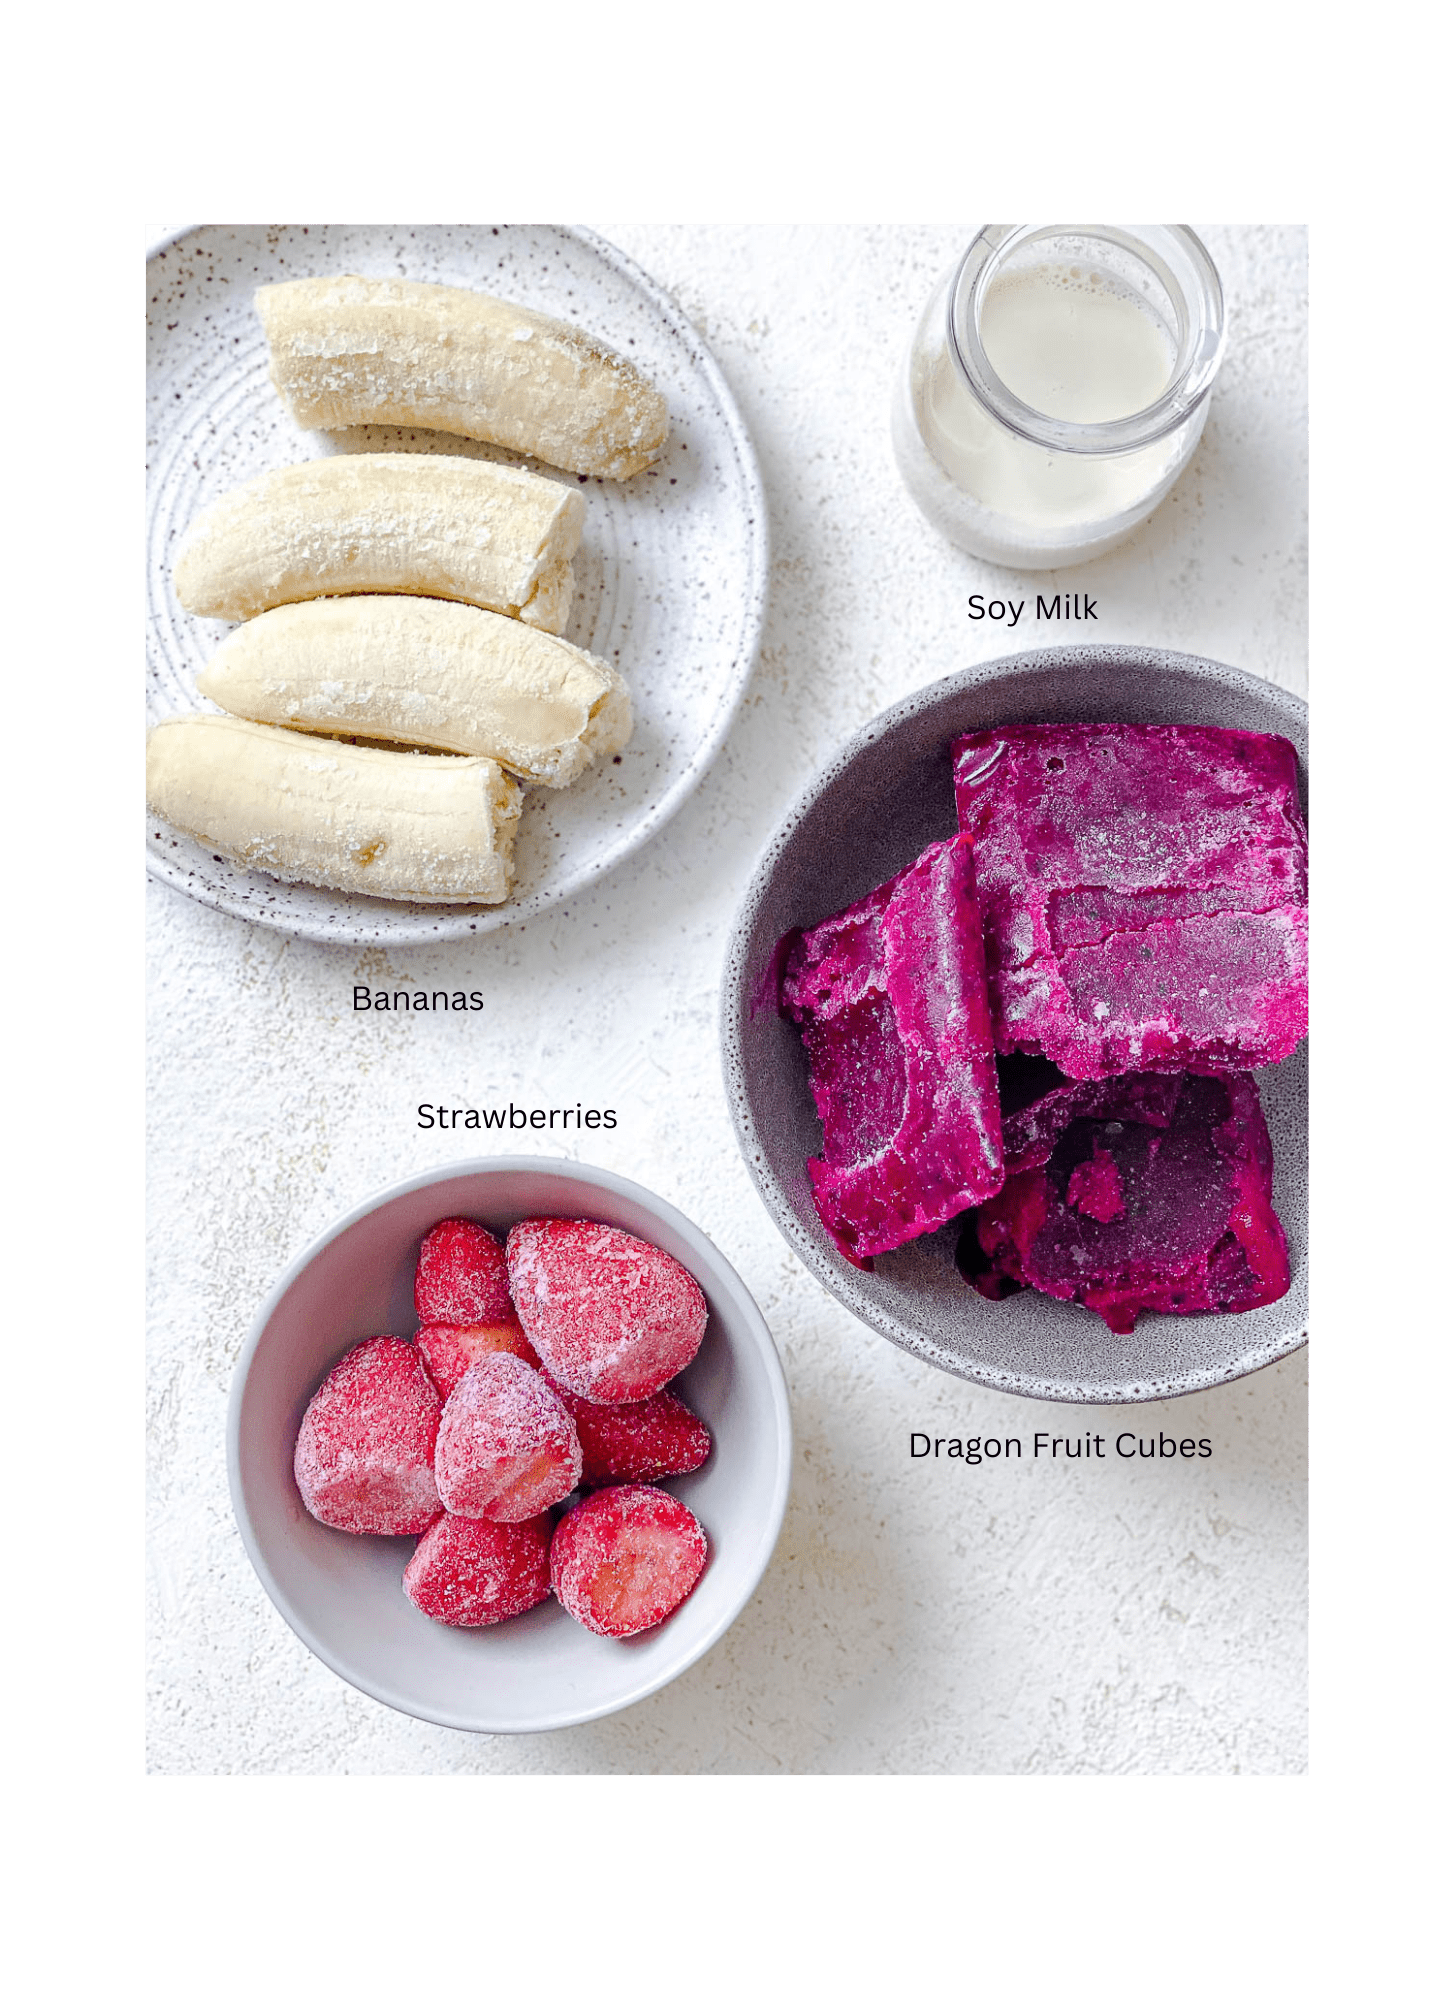 ingredients for Dragon Fruit Smoothie Bowl (Pitaya Bowl) measured out against a white surface